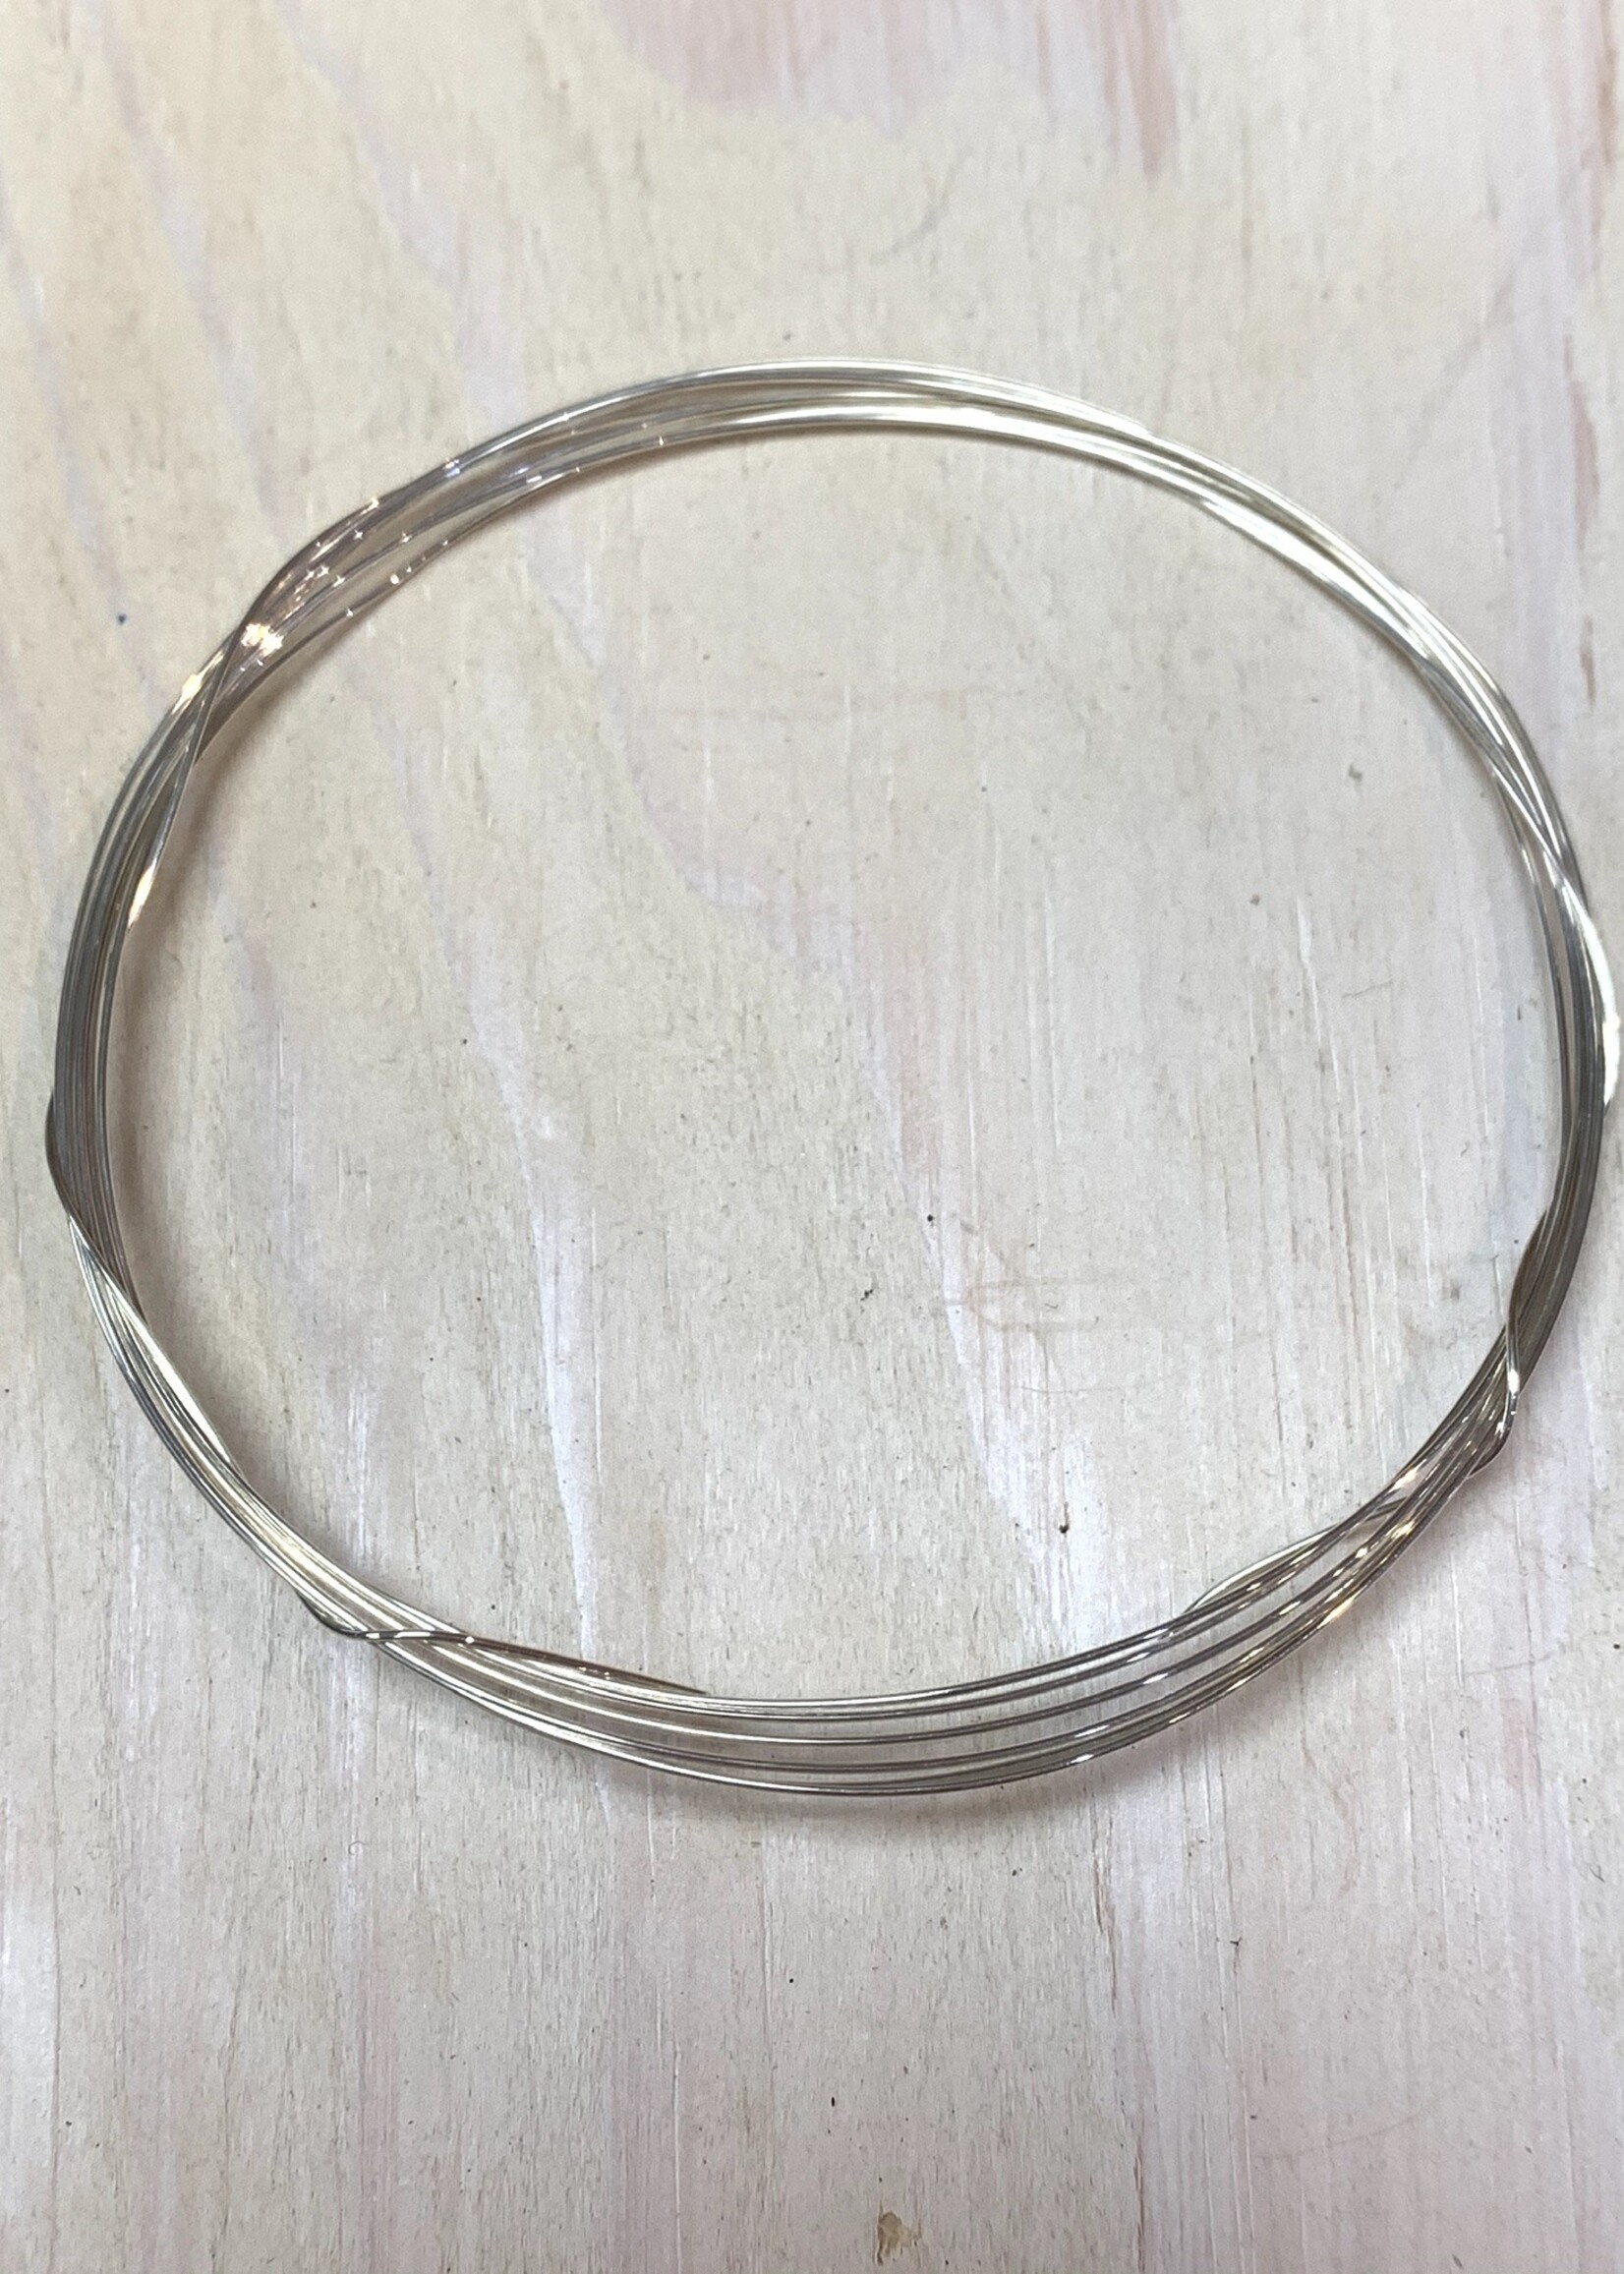 24ga Round Wire Sterling Silver 5ft